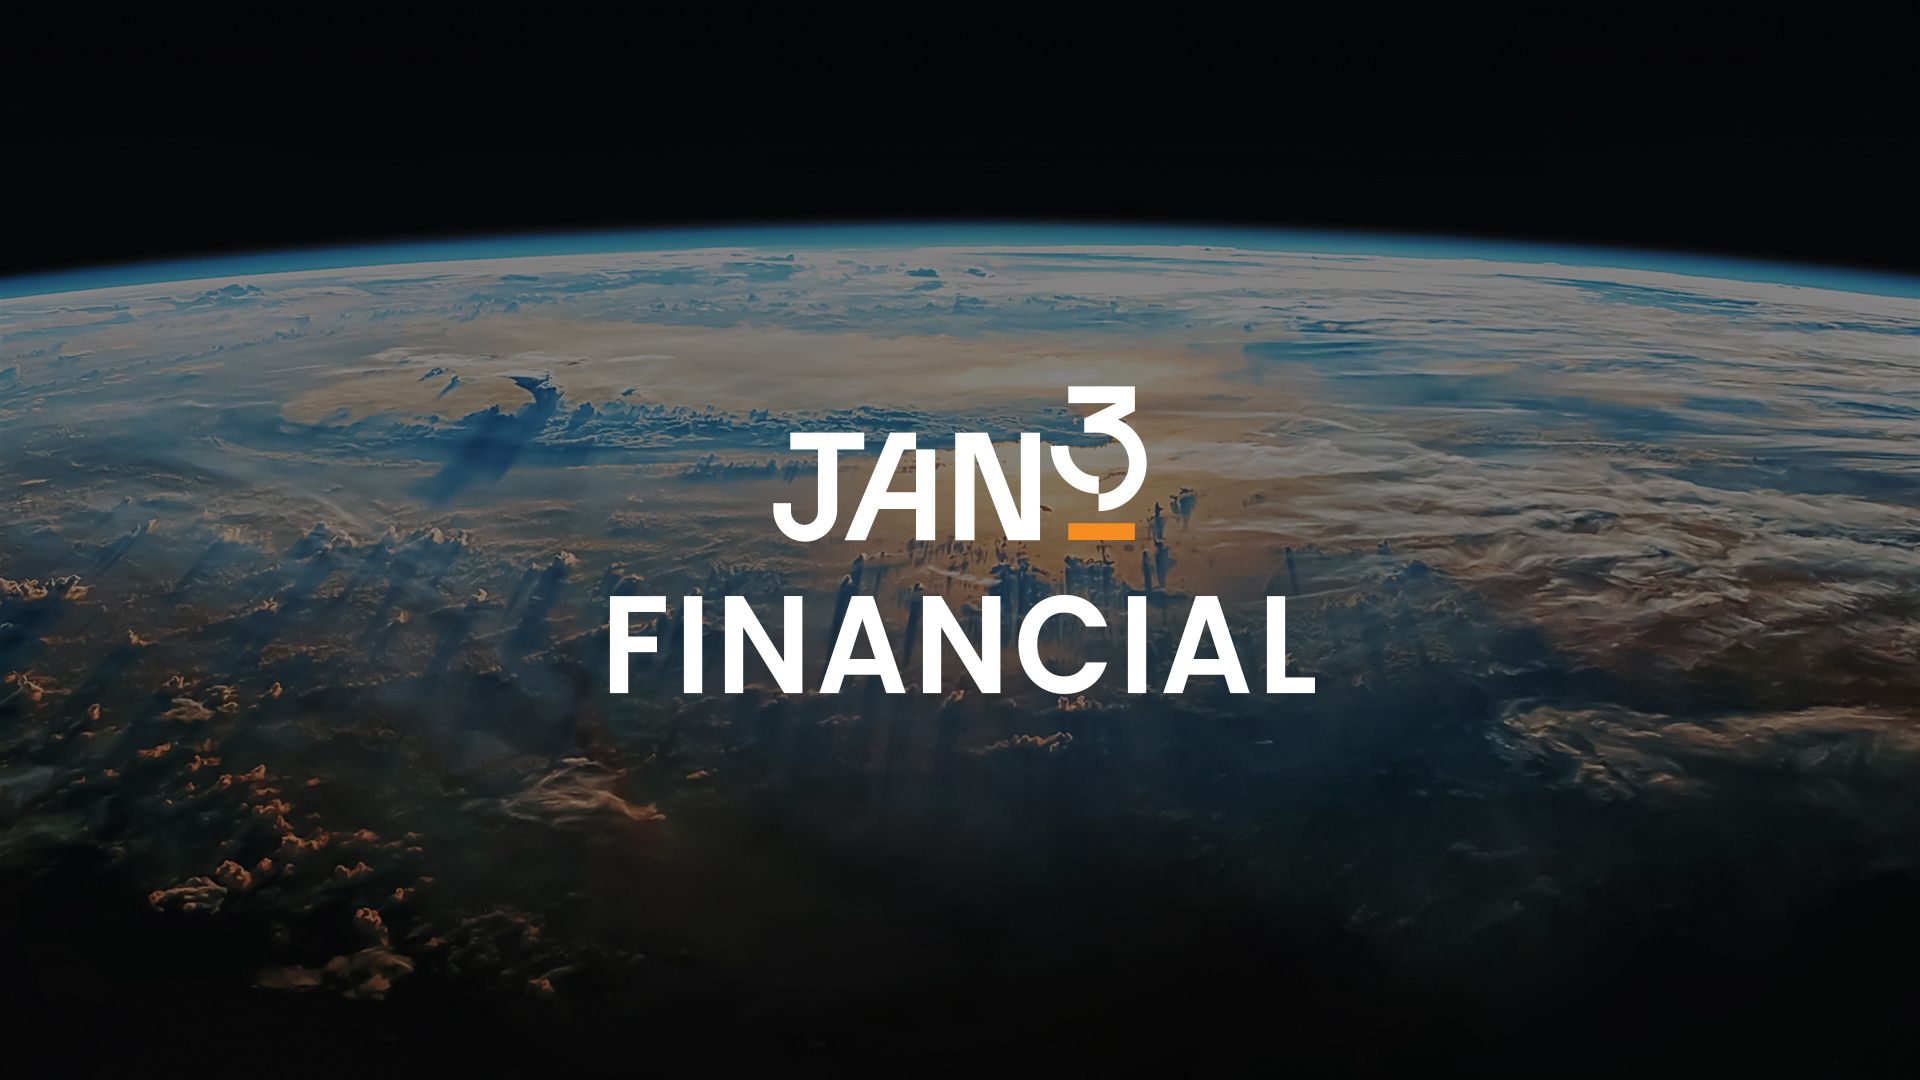 Planet earth view from space with JAN3 Financial logo on top.